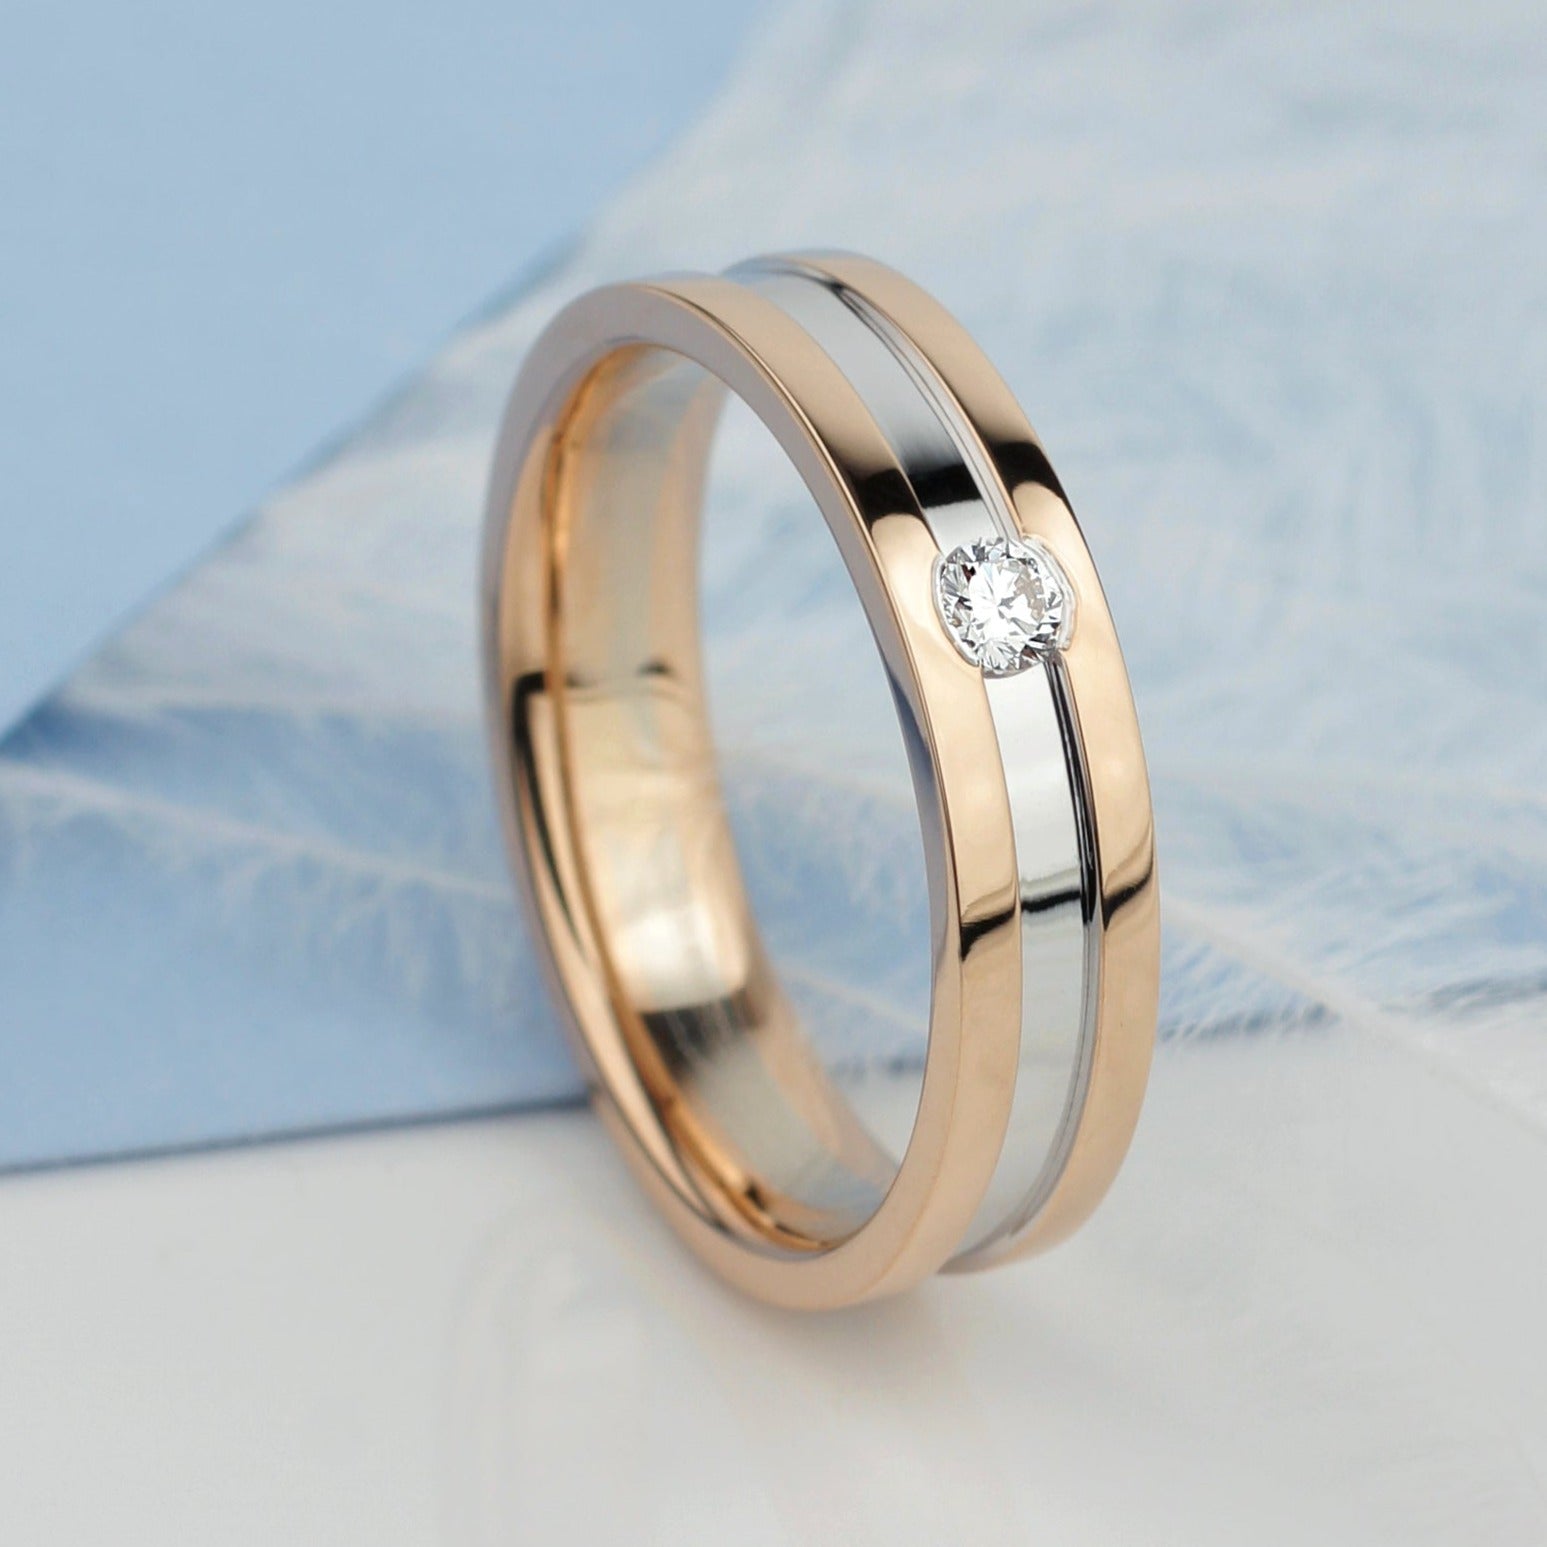 Matching wedding bands made of two colors of gold. Wedding rings set. Couple wedding bands. His and hers wedding rings set. Unique wedding bands. Two-tone wedding rings